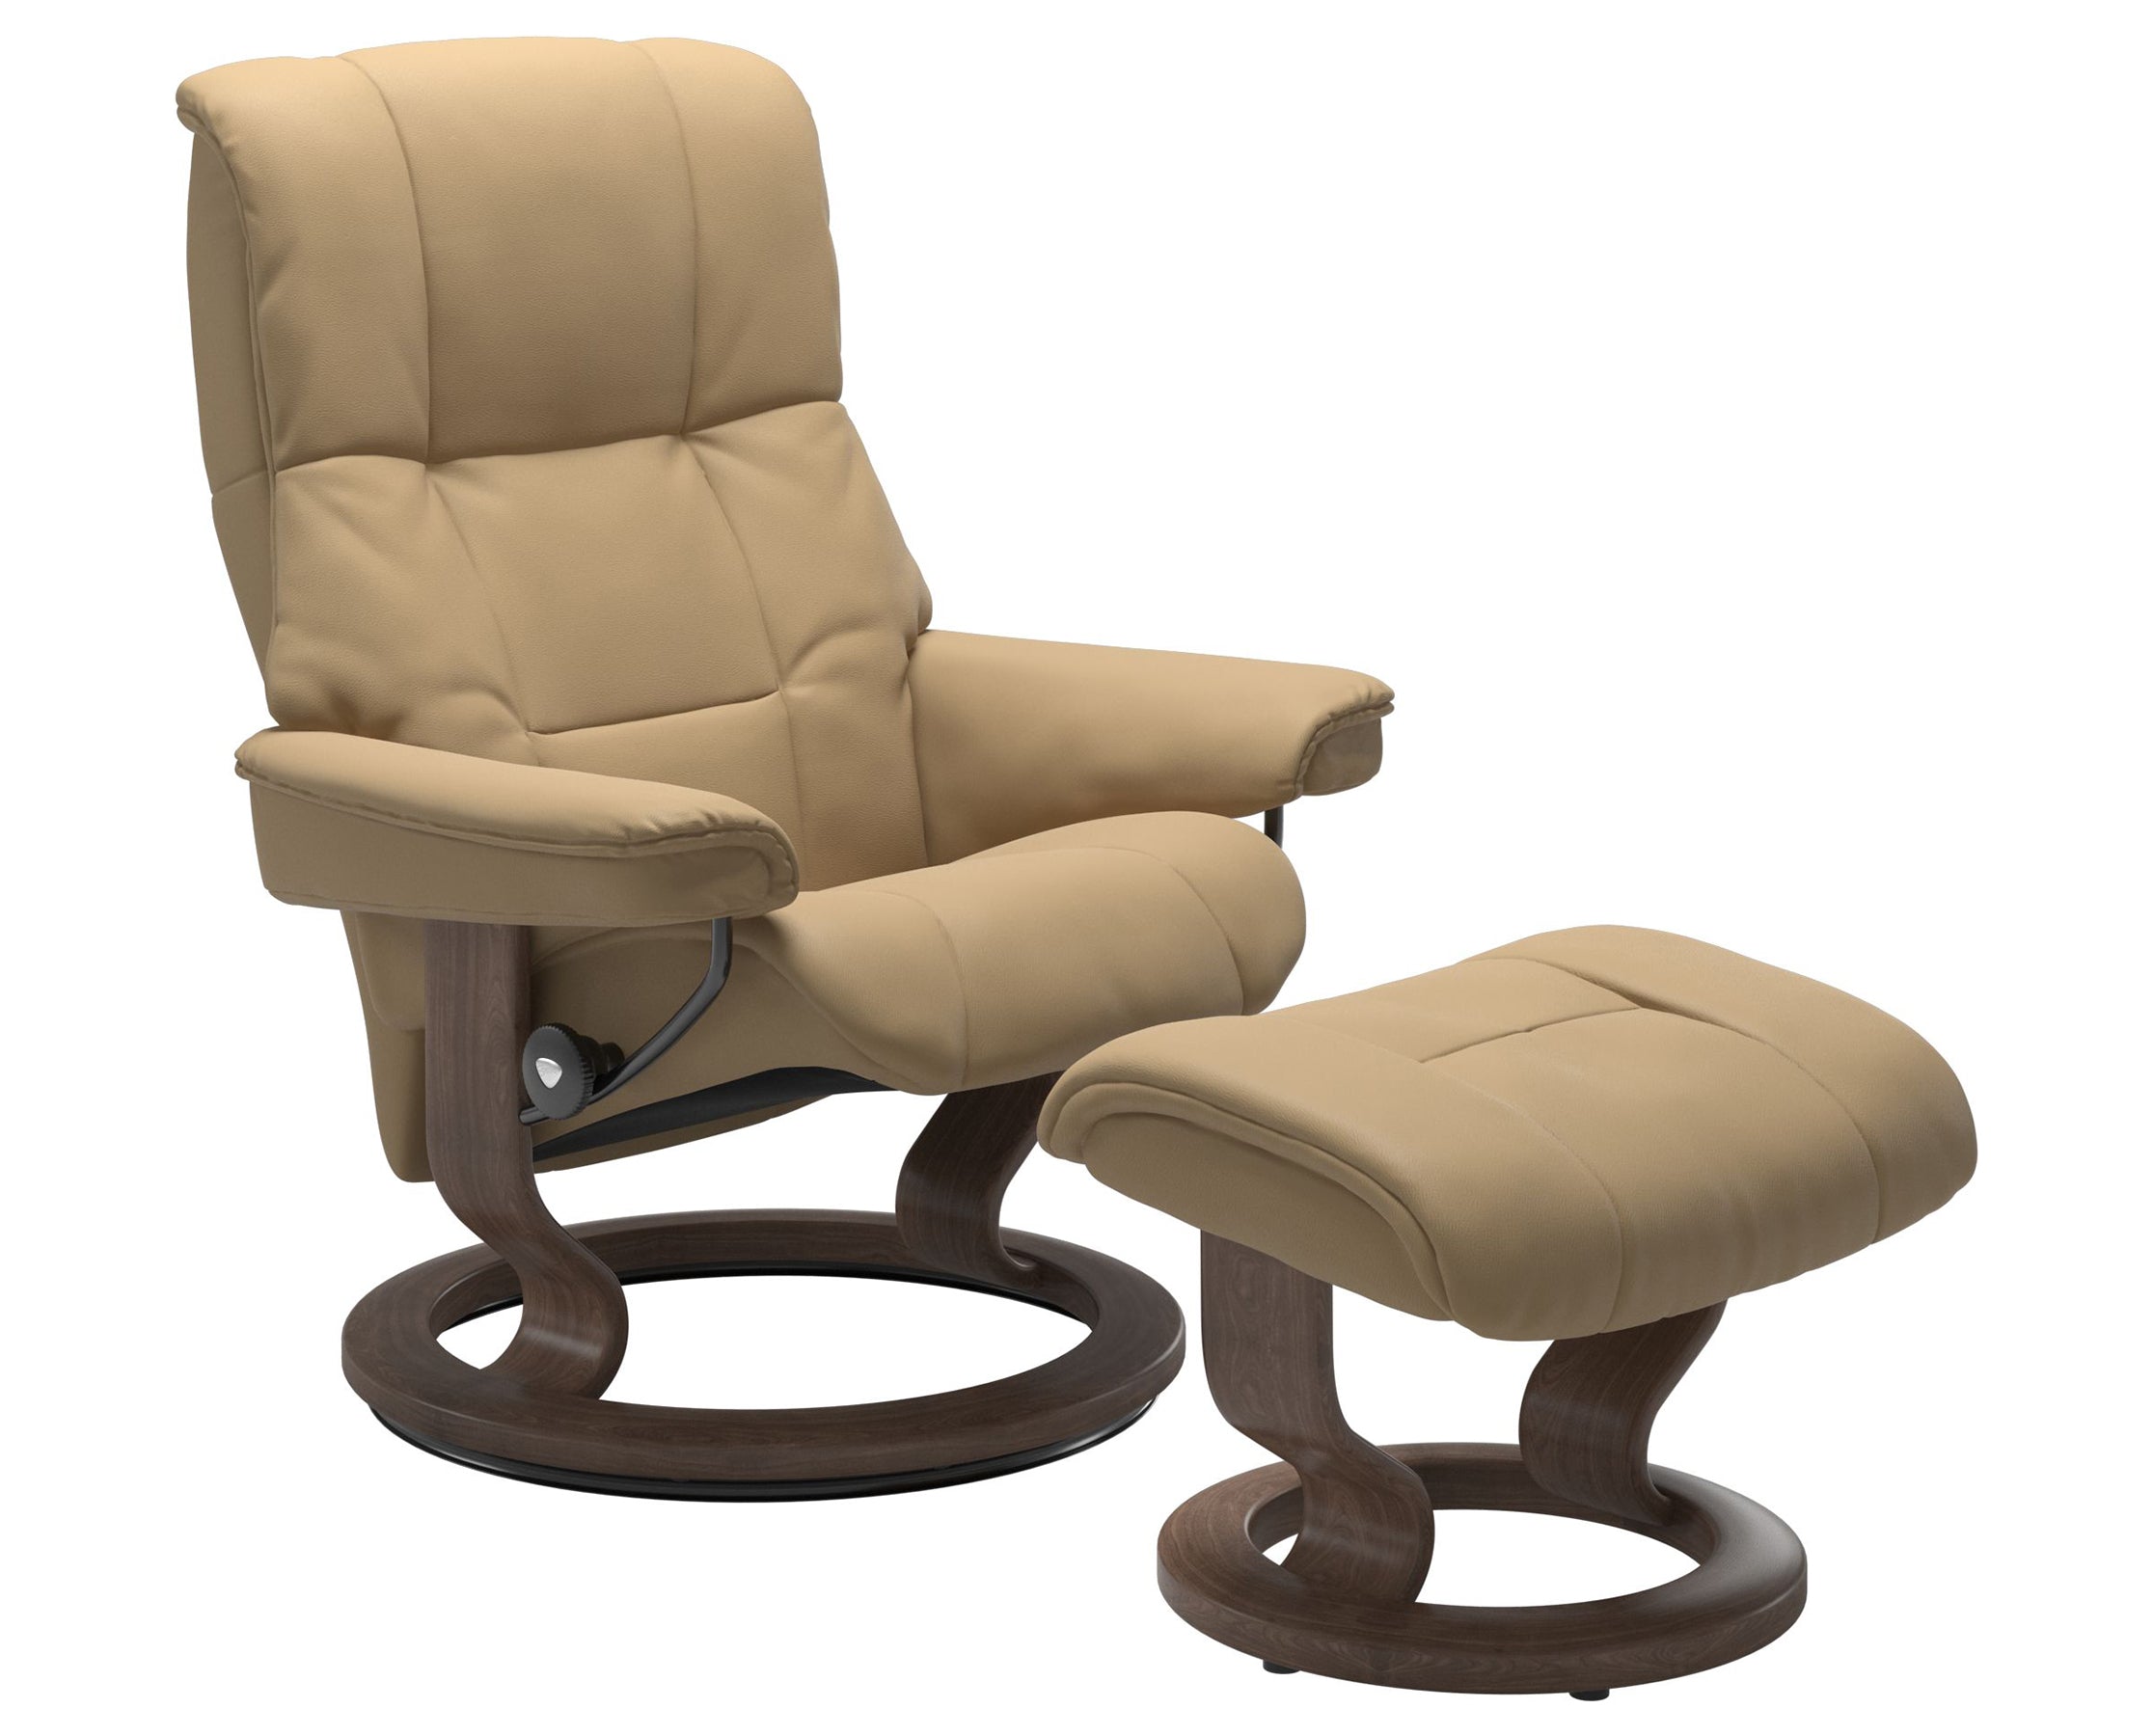 Paloma Leather Sand S/M/L and Walnut Base | Stressless Mayfair Classic Recliner | Valley Ridge Furniture